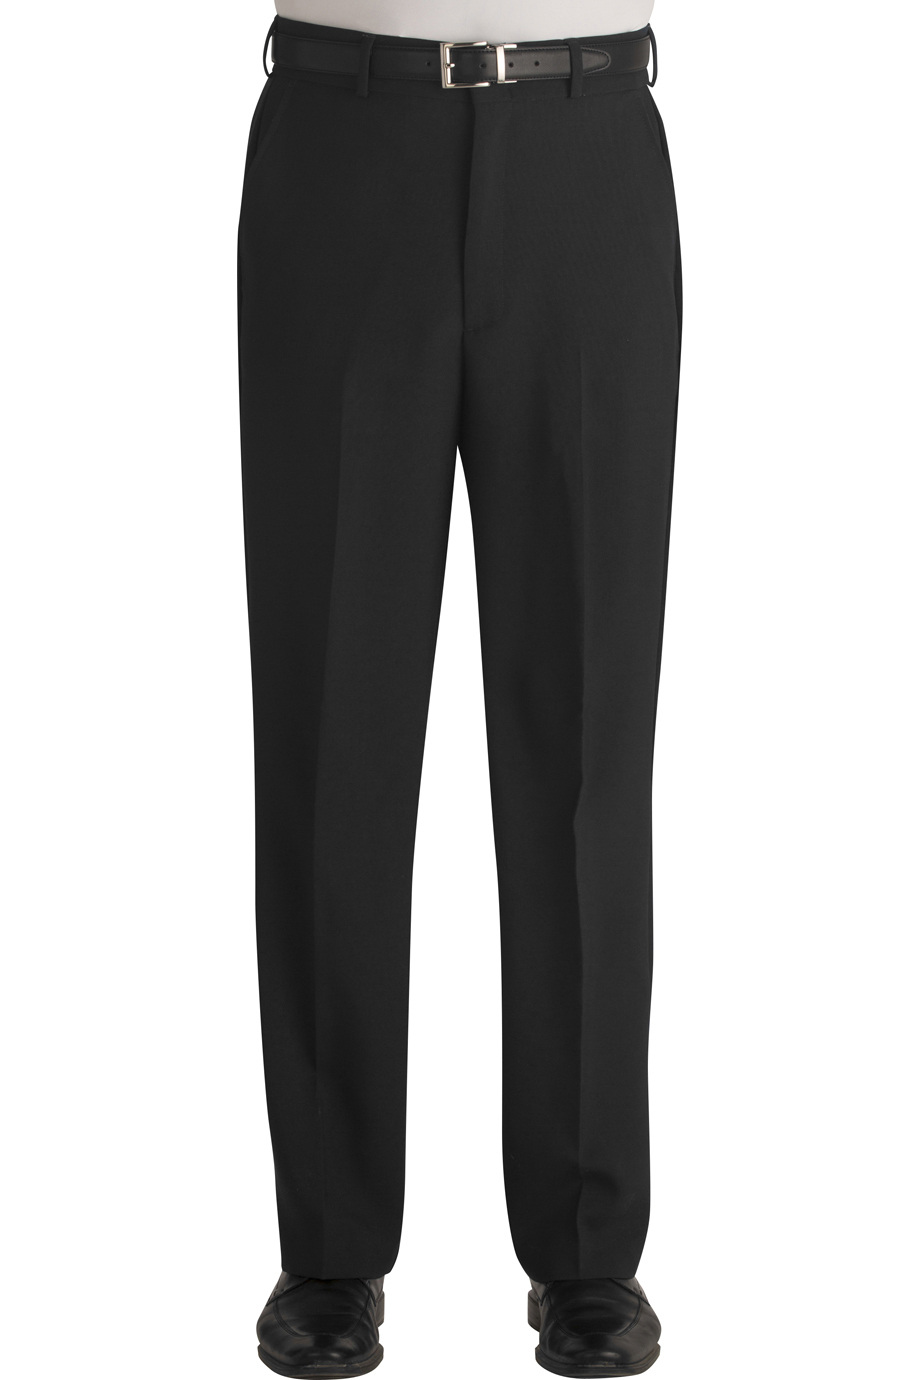 Edwards Mens Classic Flat Front Security Pant 